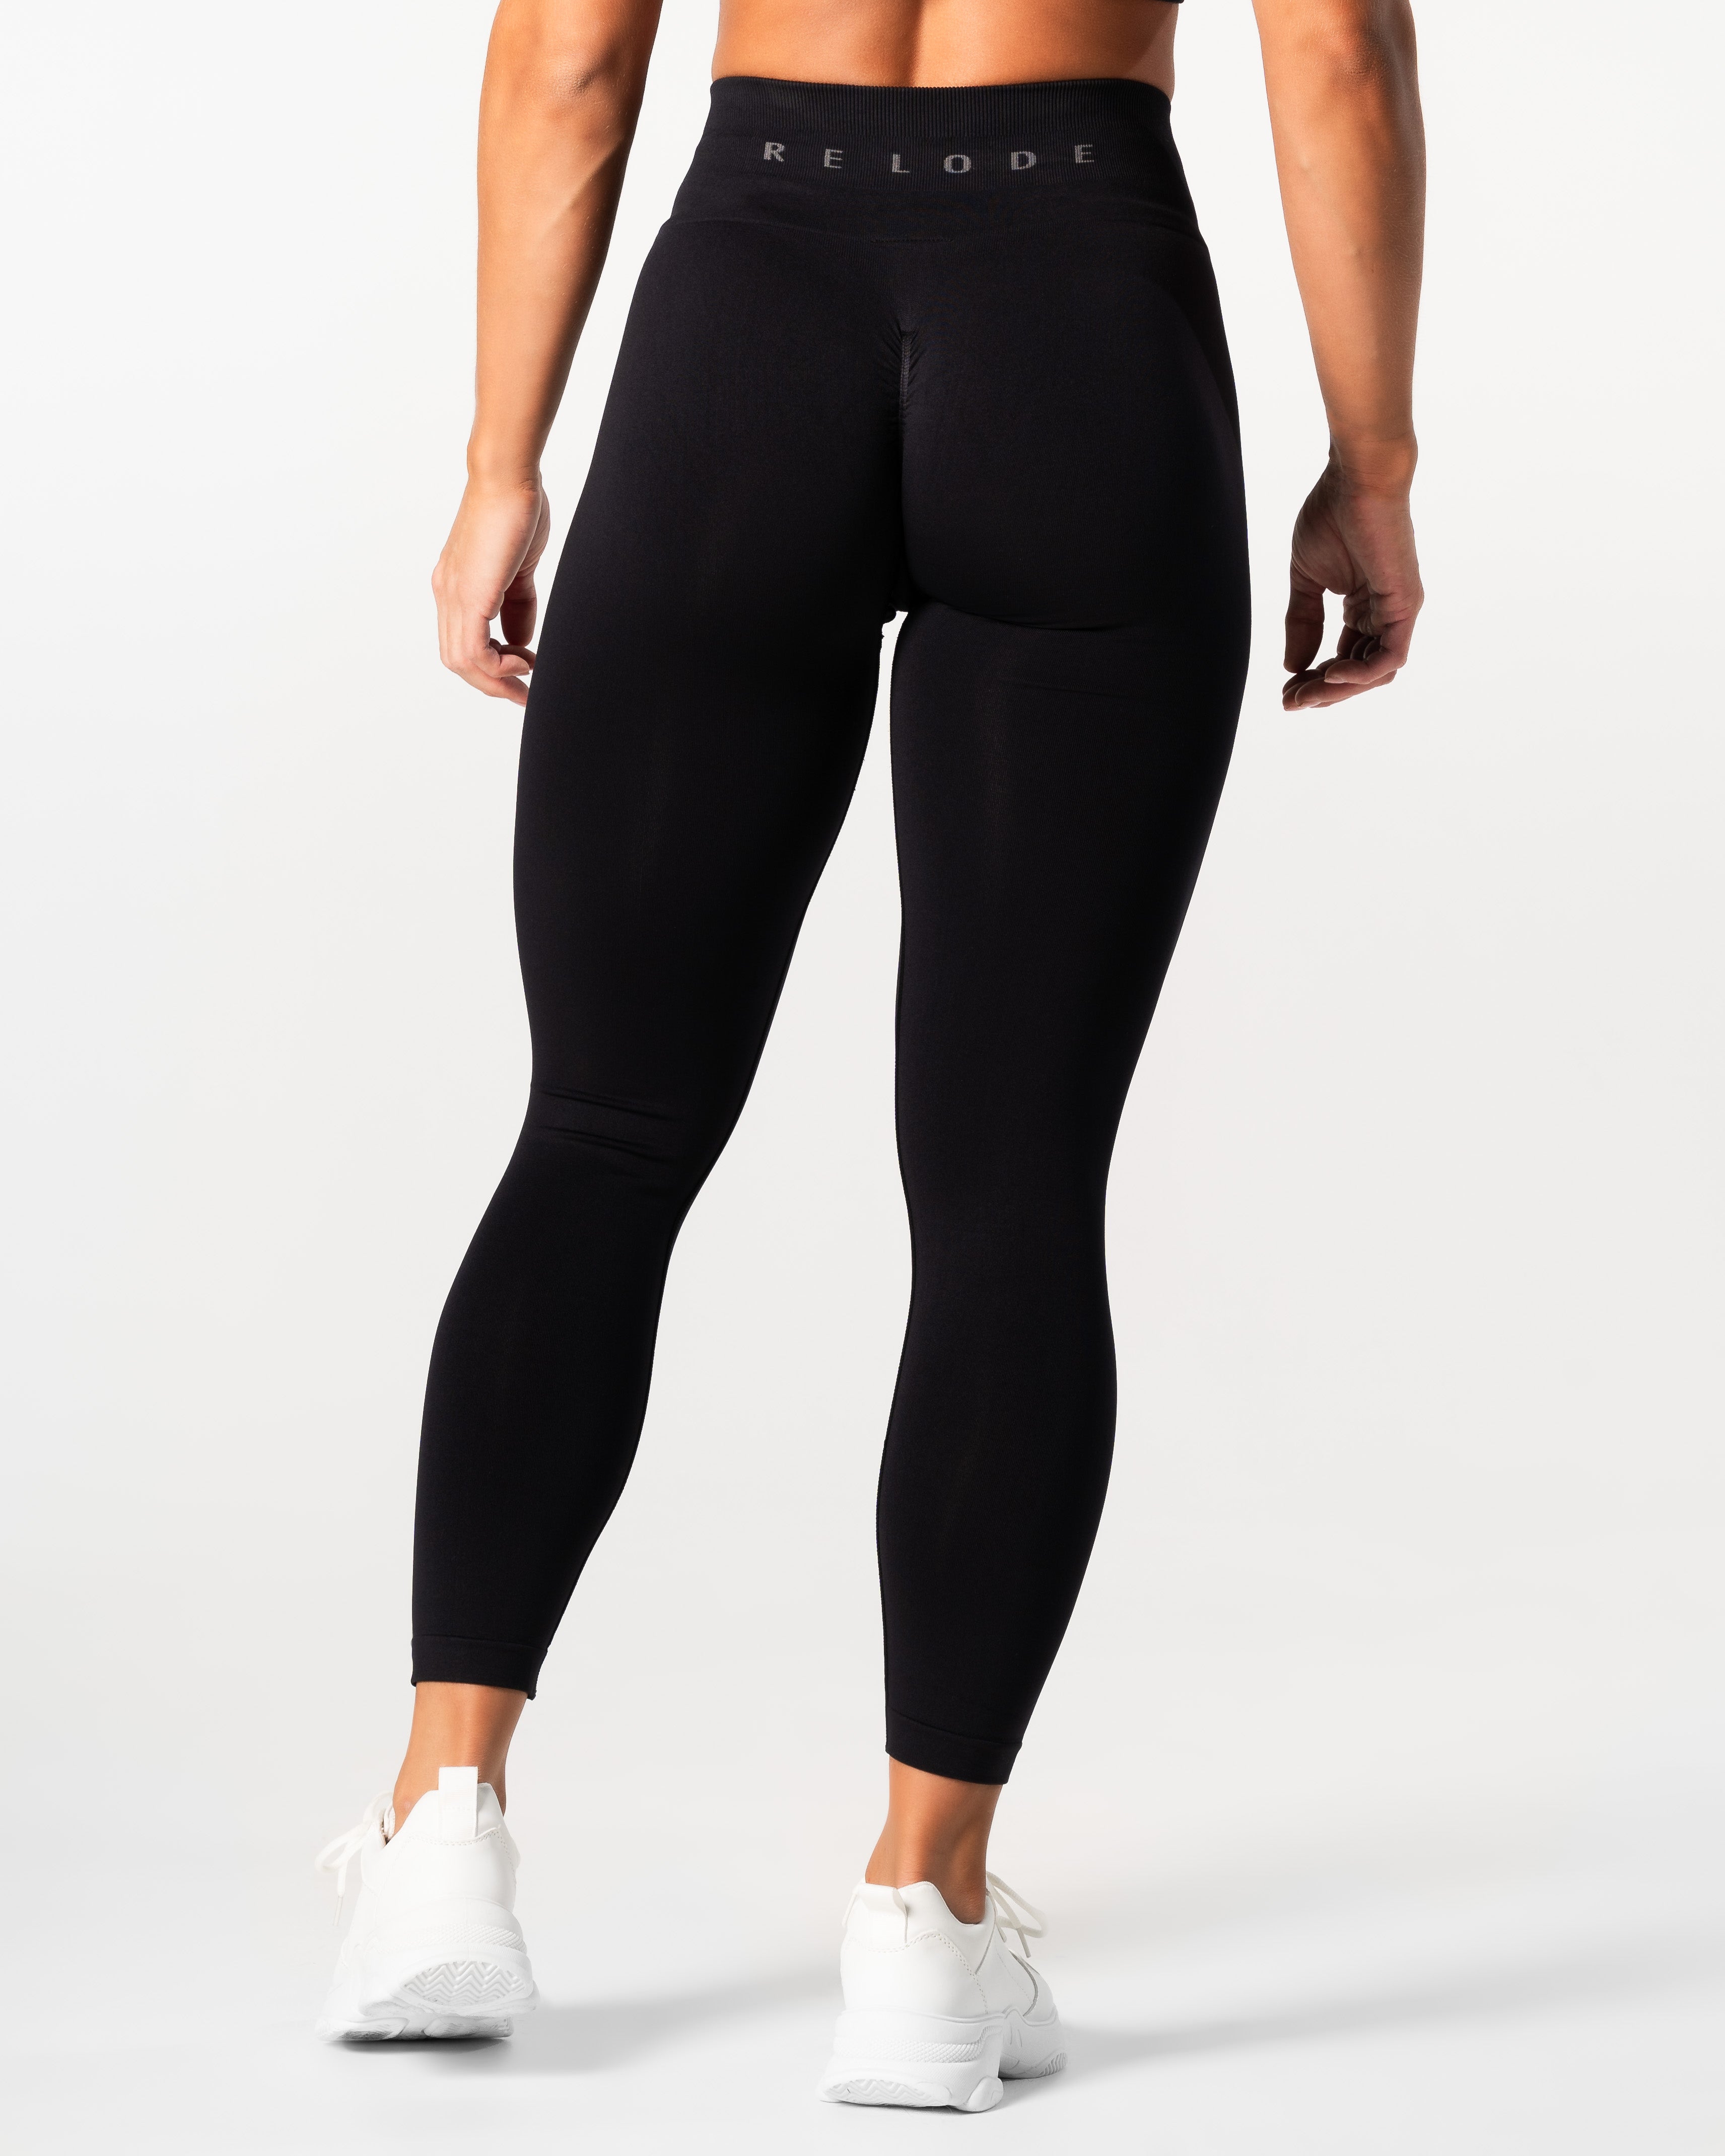 the BEST no show/seamless th🩷ngs to wear underneath leggings